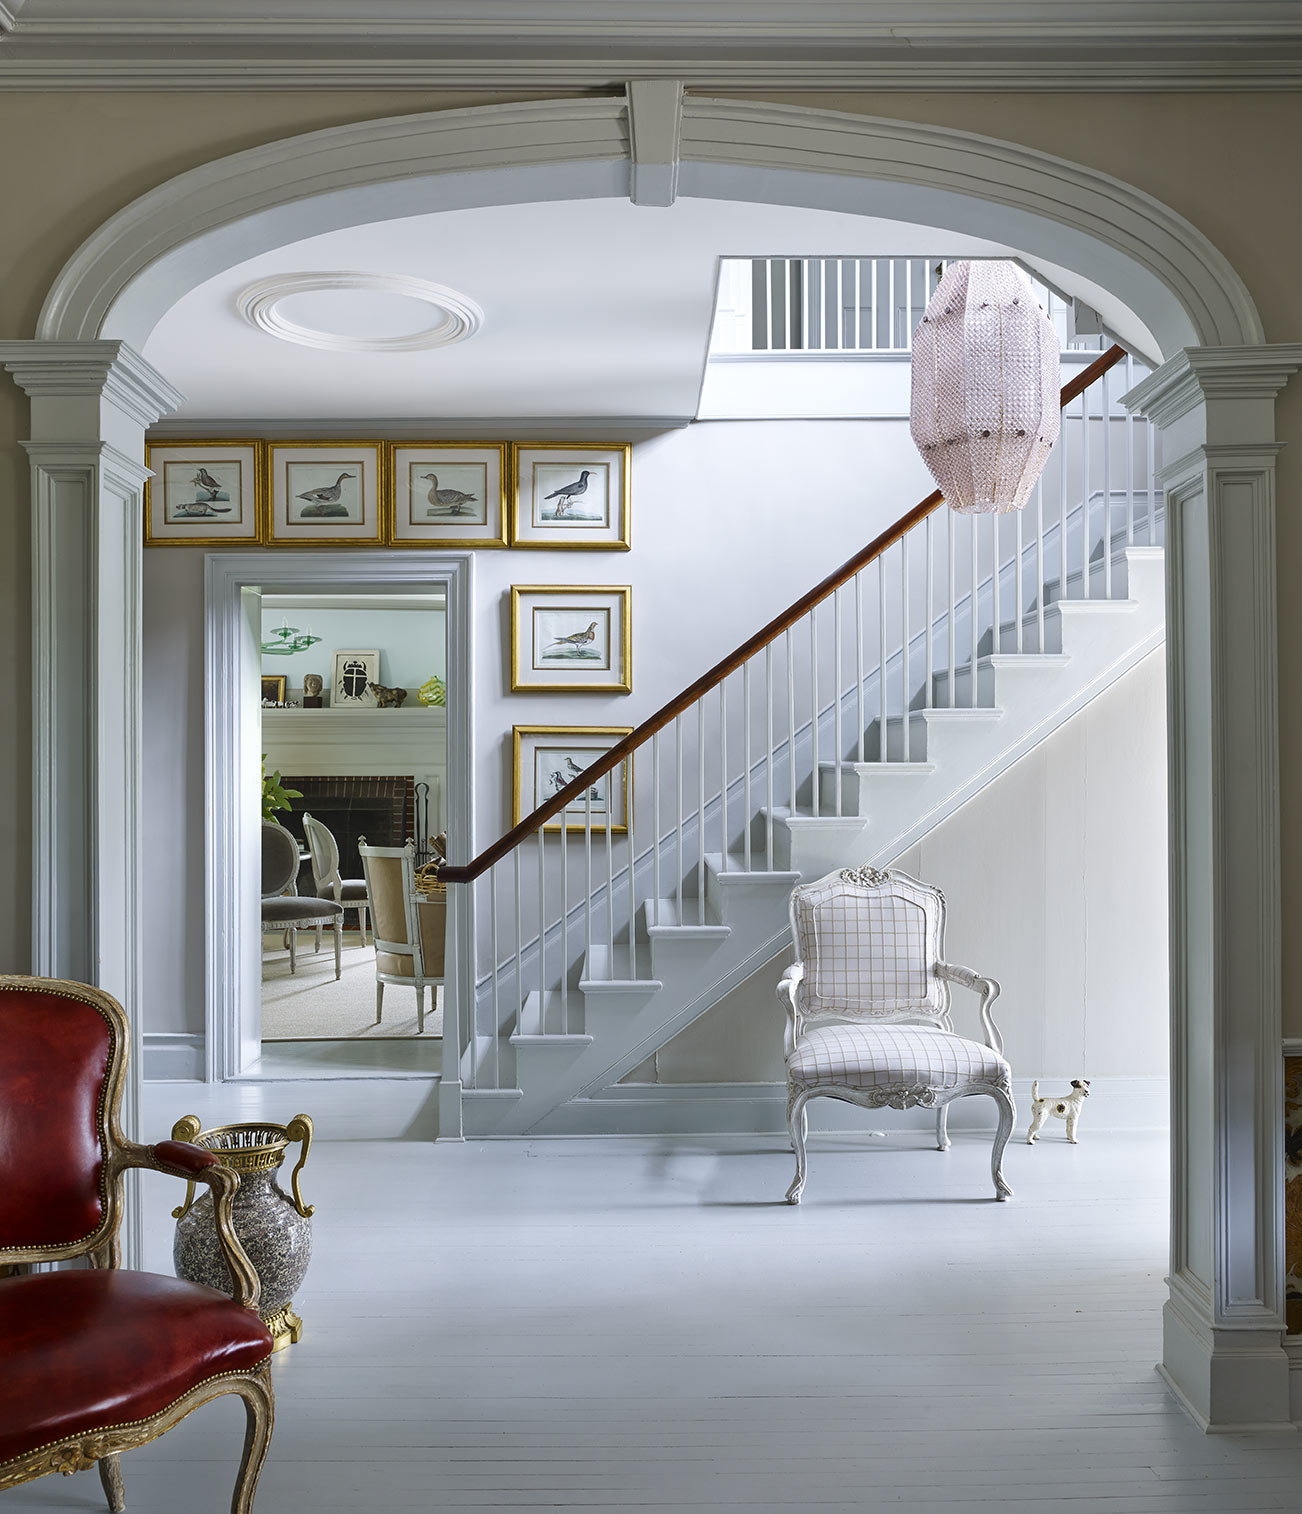 Elegant staircase viewed through ornamental arch with framed walls prints at base of stairs.